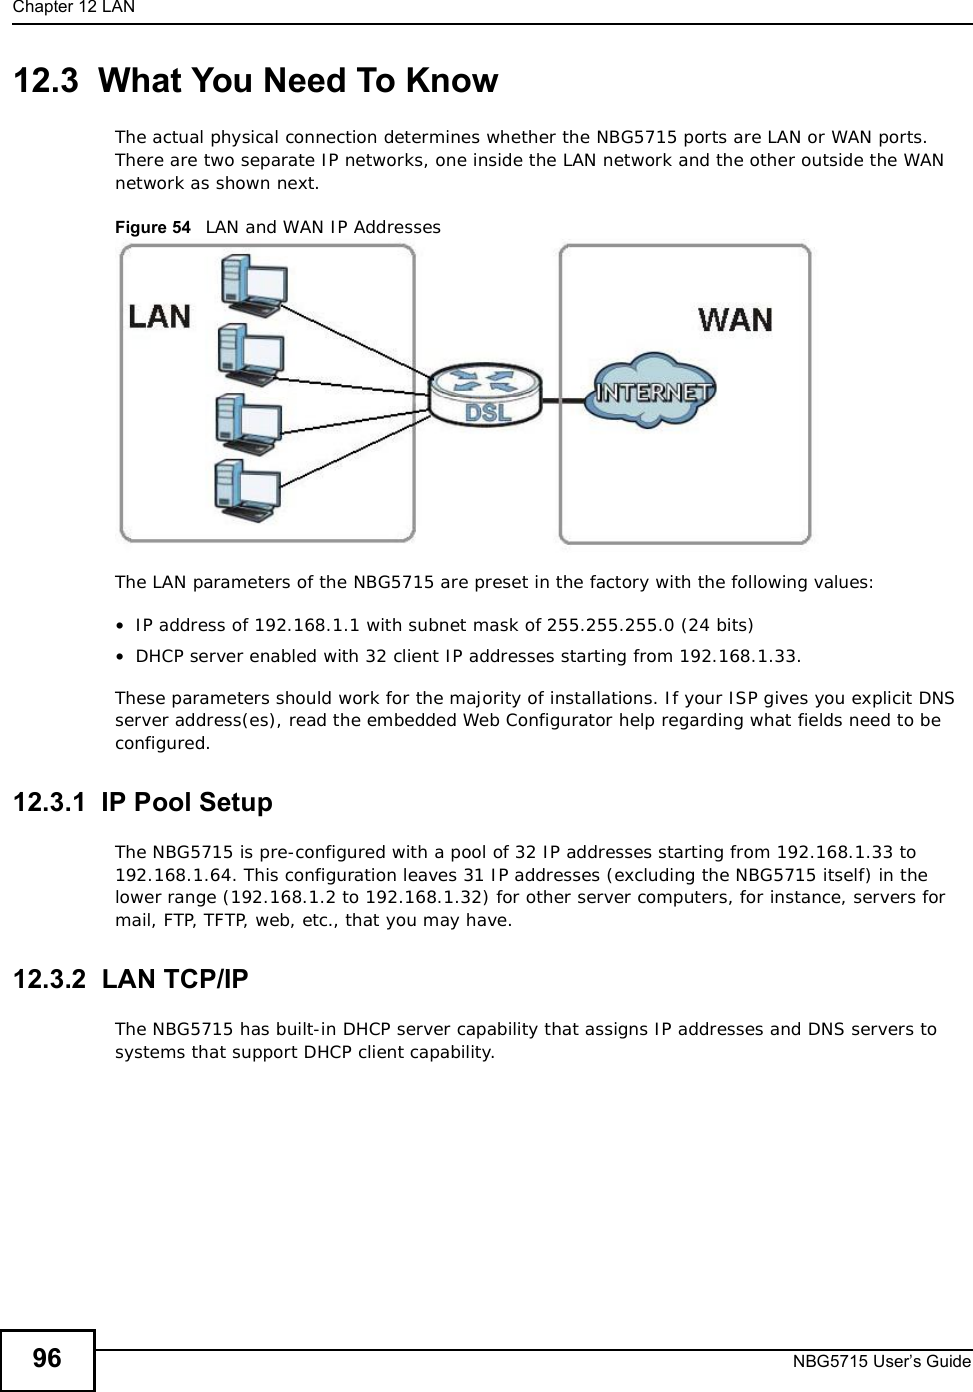 Chapter 12LANNBG5715 User’s Guide9612.3  What You Need To KnowThe actual physical connection determines whether the NBG5715 ports are LAN or WAN ports. There are two separate IP networks, one inside the LAN network and the other outside the WAN network as shown next.Figure 54   LAN and WAN IP AddressesThe LAN parameters of the NBG5715 are preset in the factory with the following values:•IP address of 192.168.1.1 with subnet mask of 255.255.255.0 (24 bits)•DHCP server enabled with 32 client IP addresses starting from 192.168.1.33. These parameters should work for the majority of installations. If your ISP gives you explicit DNS server address(es), read the embedded Web Configurator help regarding what fields need to be configured.12.3.1  IP Pool SetupThe NBG5715 is pre-configured with a pool of 32 IP addresses starting from 192.168.1.33 to 192.168.1.64. This configuration leaves 31 IP addresses (excluding the NBG5715 itself) in the lower range (192.168.1.2 to 192.168.1.32) for other server computers, for instance, servers for mail, FTP, TFTP, web, etc., that you may have.12.3.2  LAN TCP/IP The NBG5715 has built-in DHCP server capability that assigns IP addresses and DNS servers to systems that support DHCP client capability.